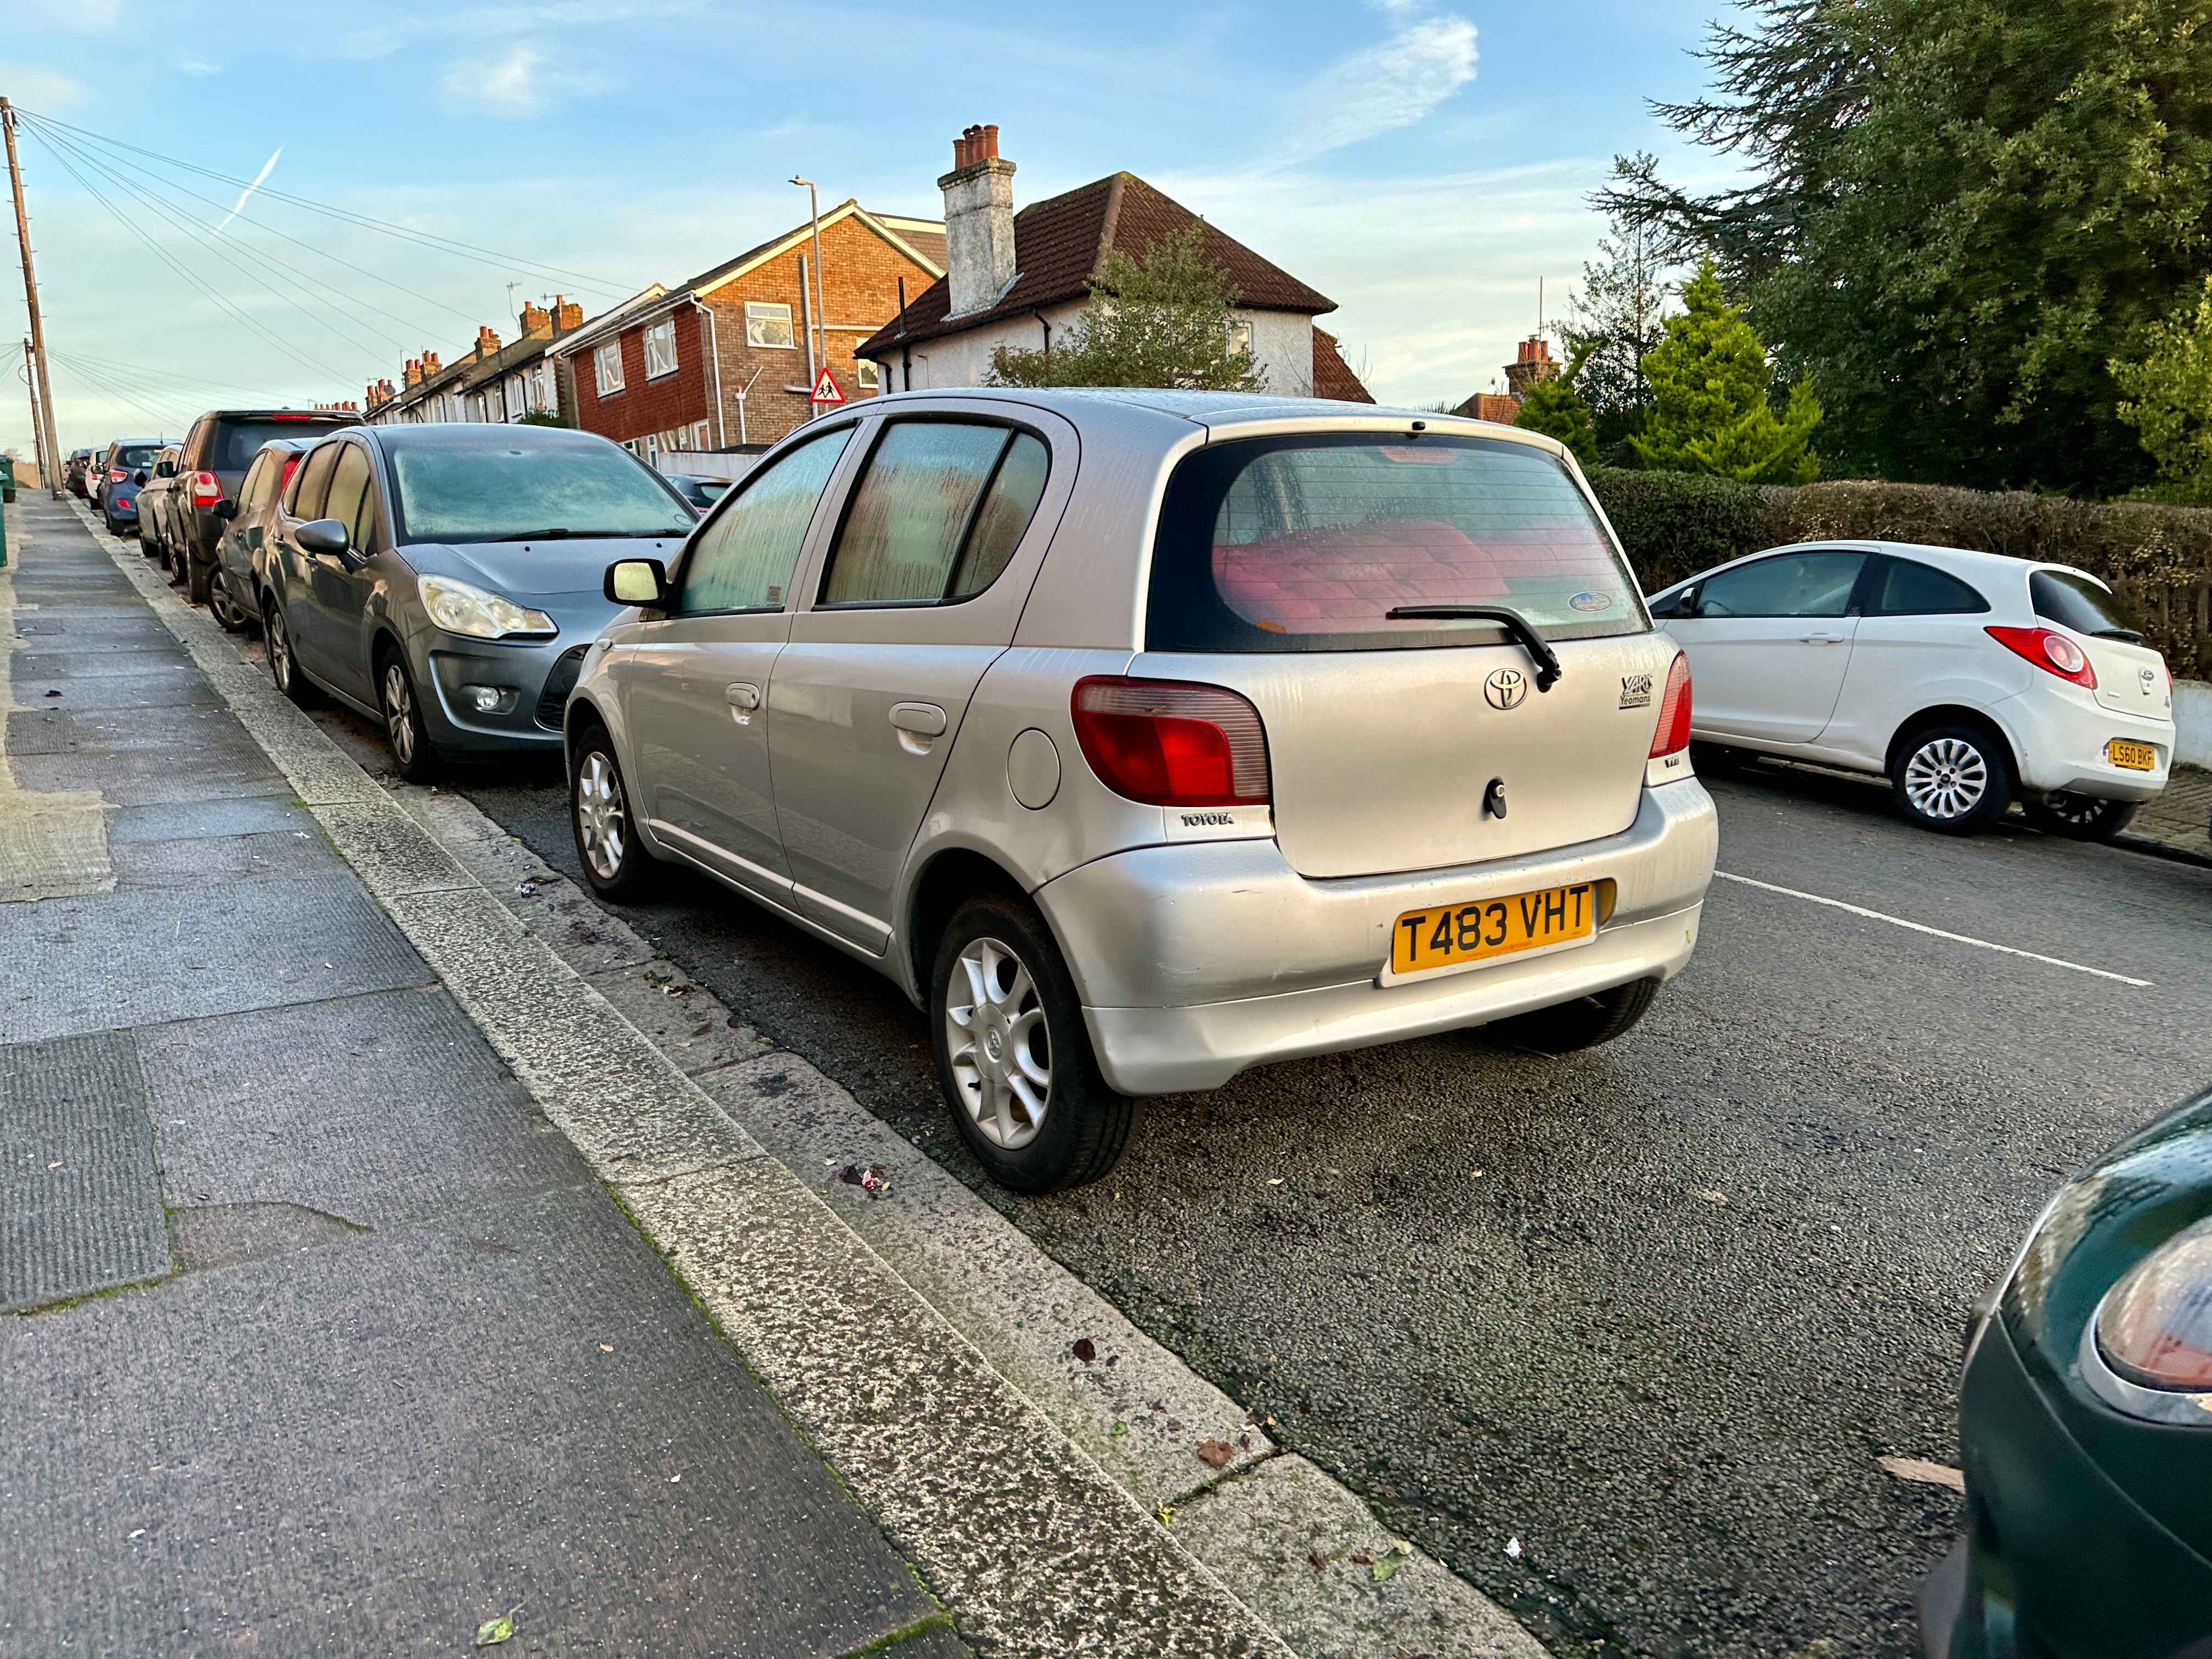 Photograph of T483 VHT - a Silver Toyota Yaris parked in Hollingdean by a non-resident. The thirteenth of fourteen photographs supplied by the residents of Hollingdean.